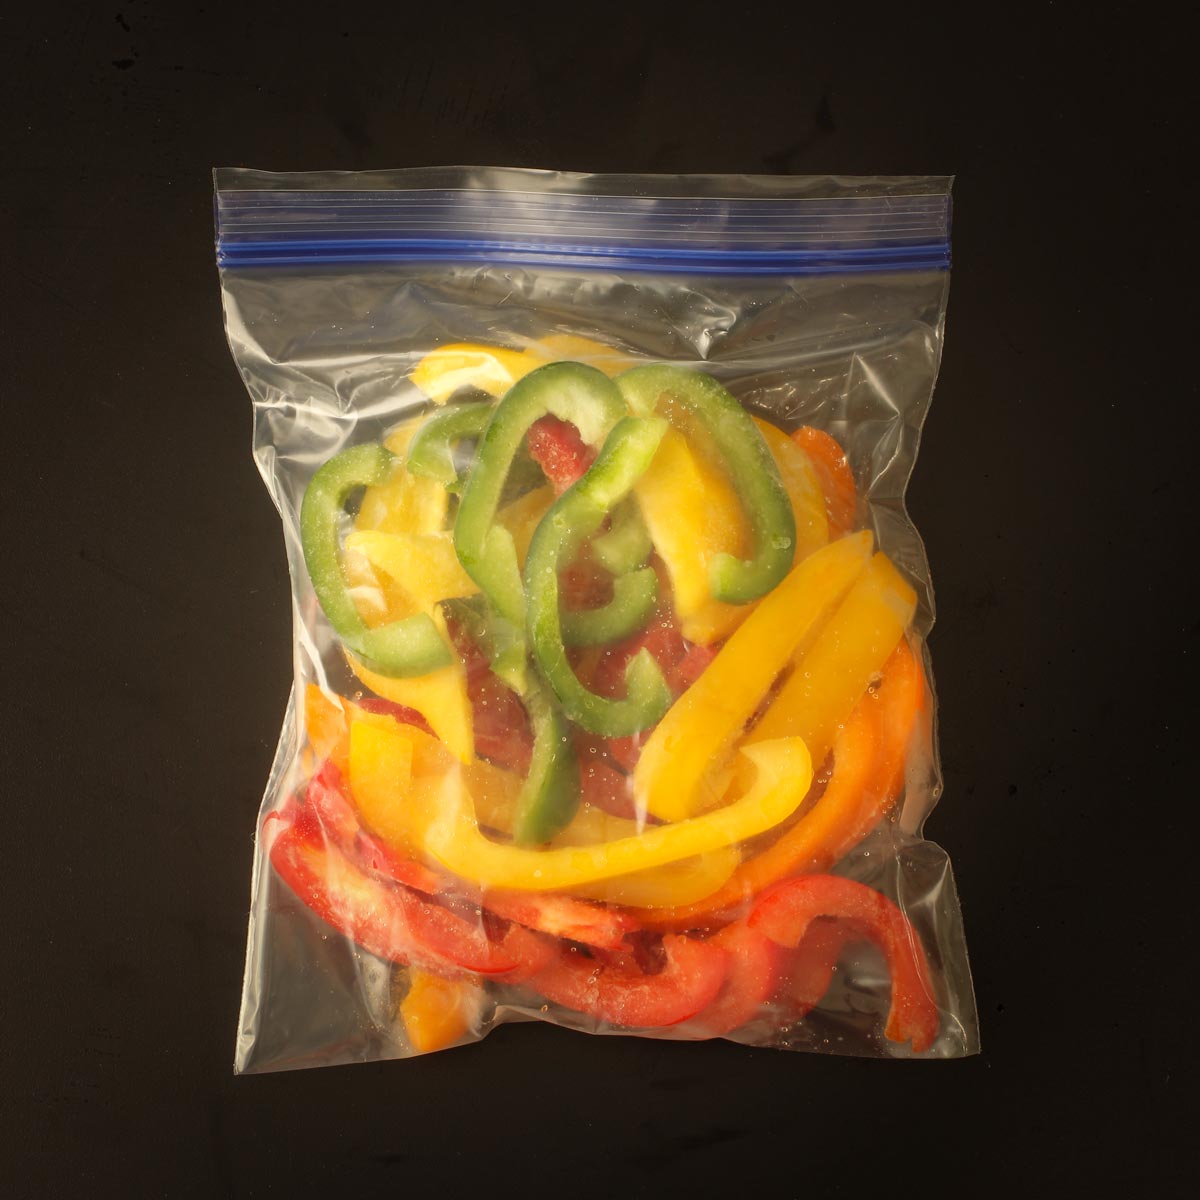 https://goodcheapeats.com/wp-content/uploads/2021/07/frozen-peppers-sliced-in-bag-square.jpg